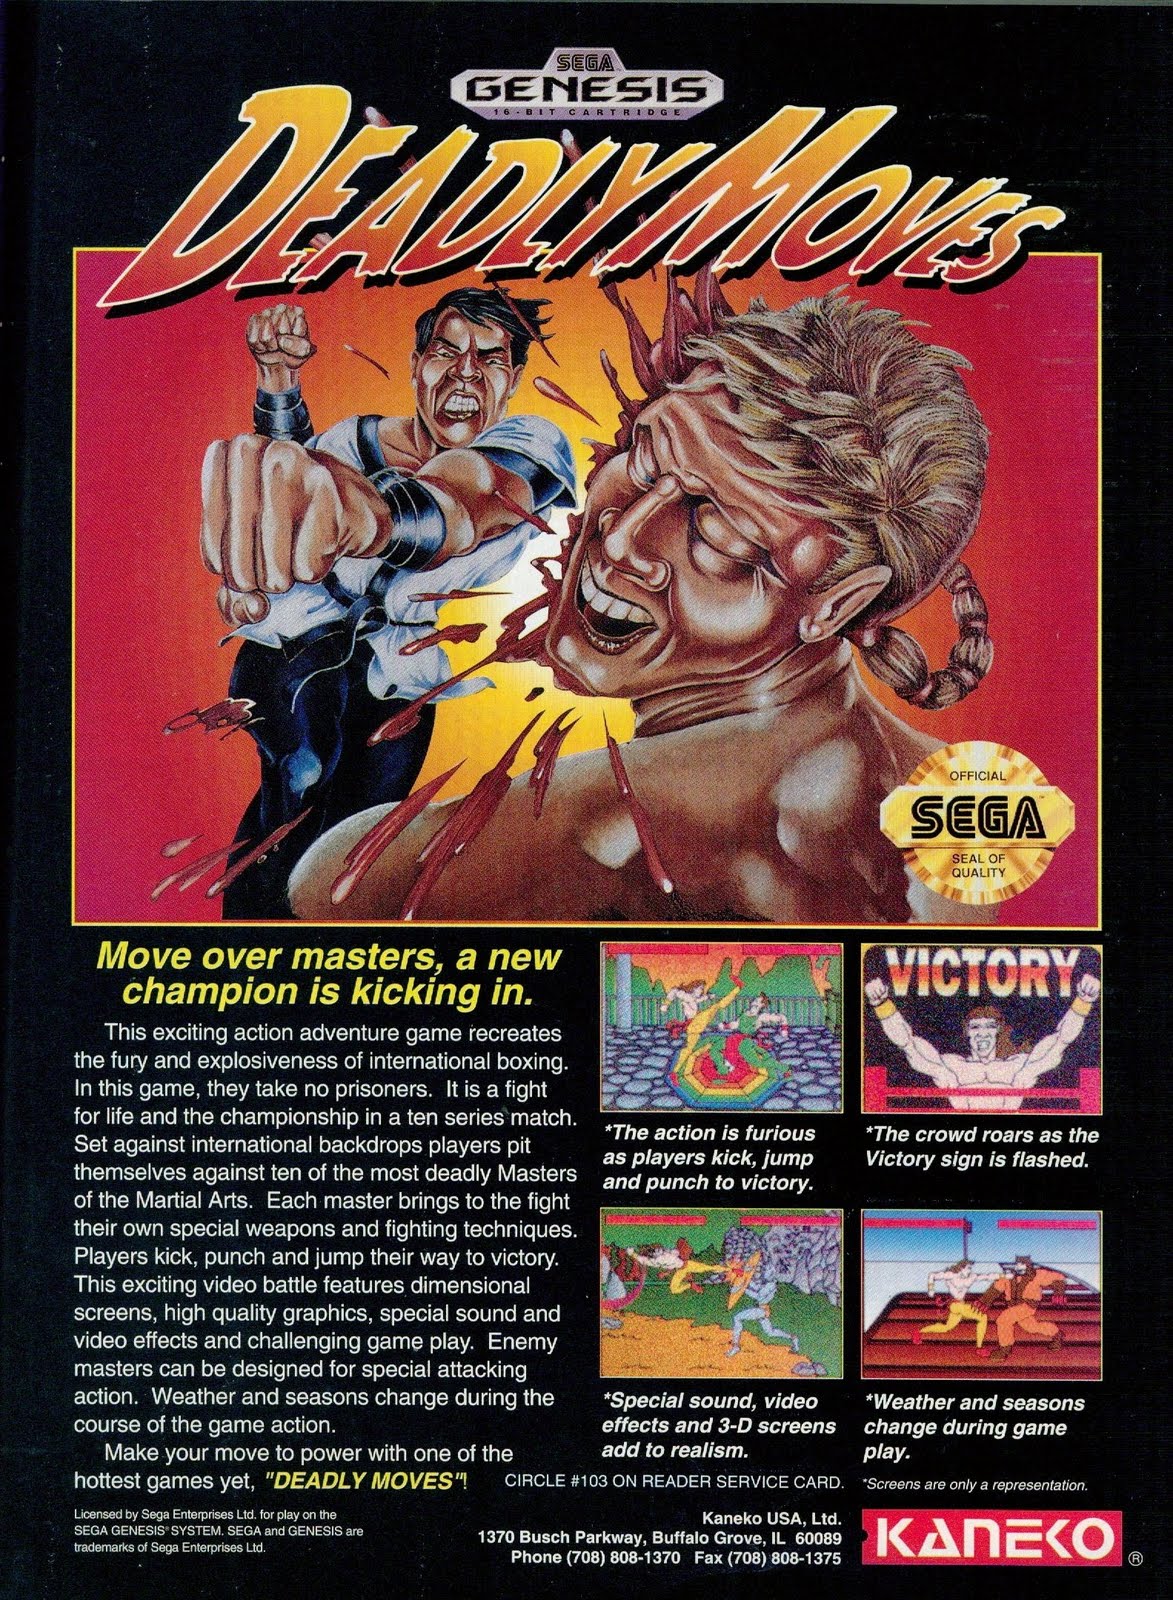 vintage gaming ads - deadly moves genesis - Genesis Sega Victory Move over masters, a new champion is kicking in. This exciting action adventure gamer s the fury and explosiveness of international boxing. in this game, they take no prisoners. It is a figh